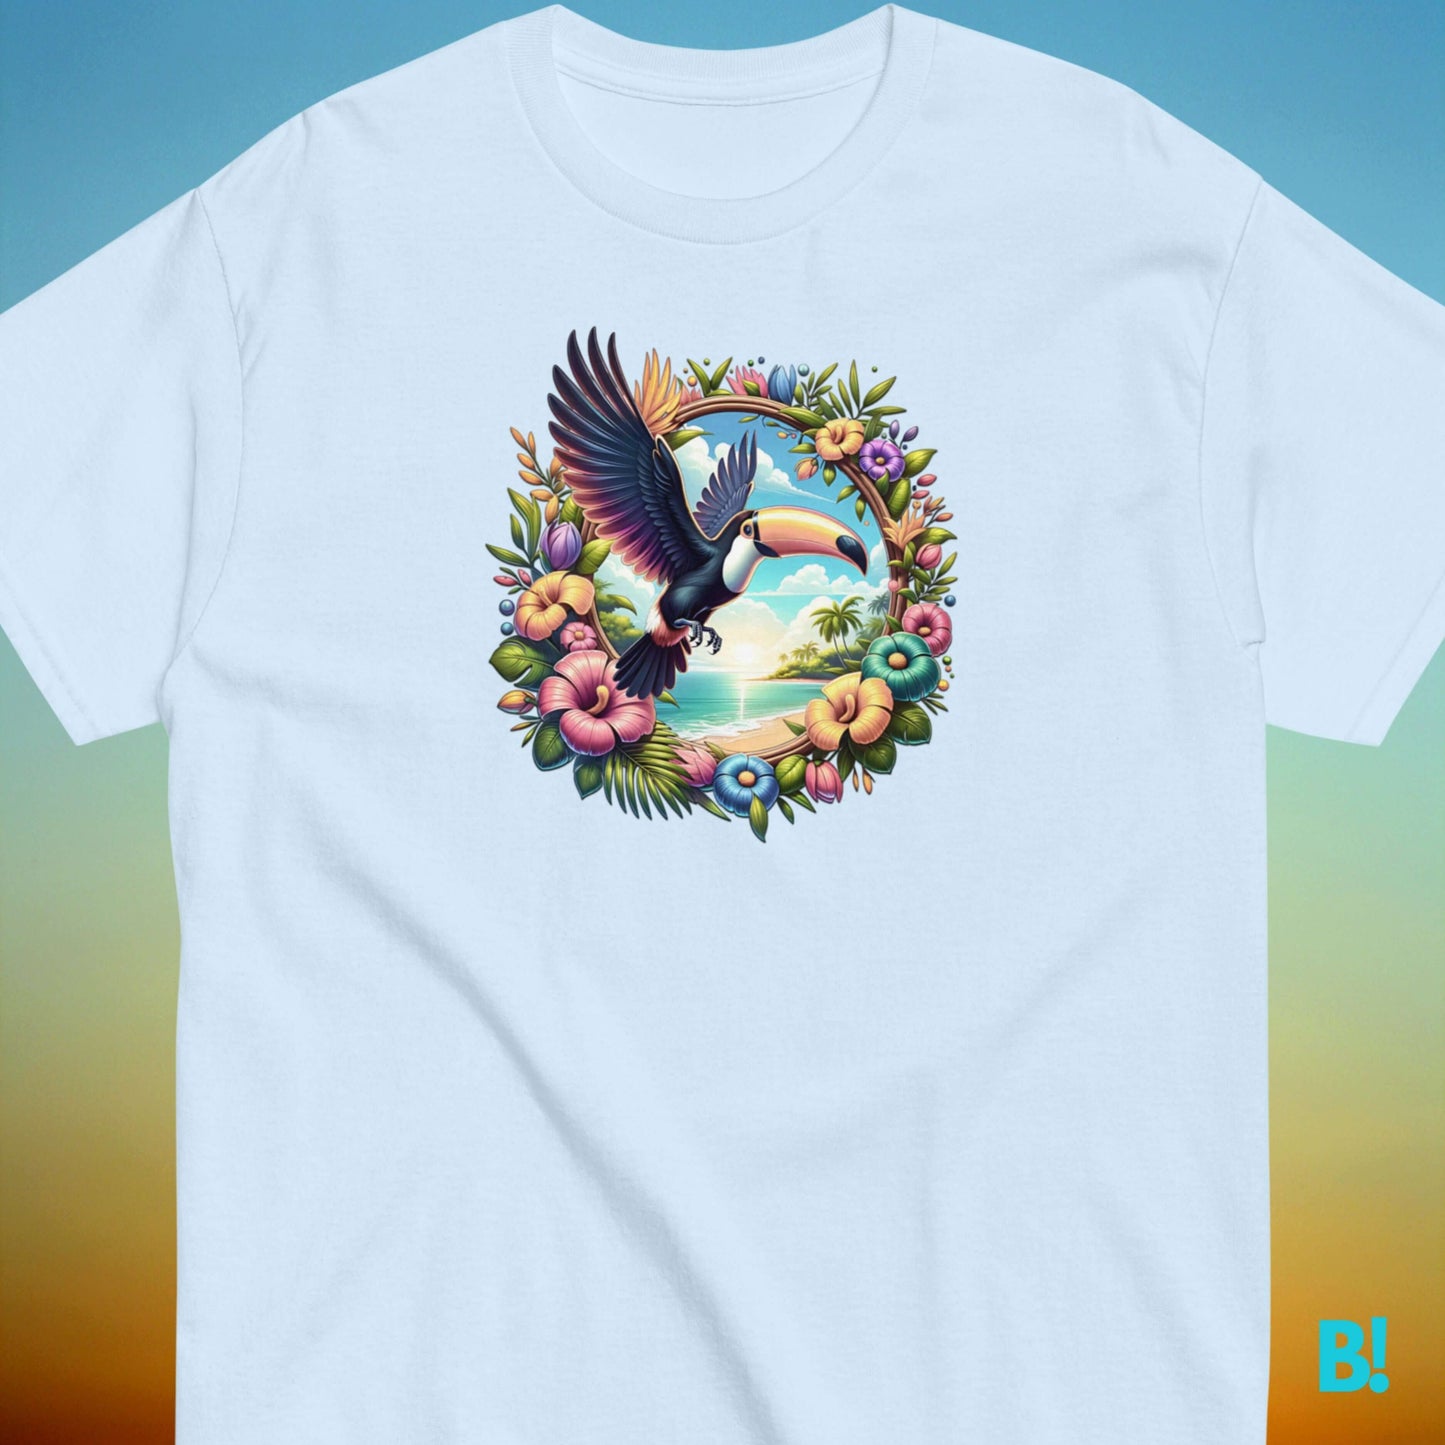 Toco Toucan T-Shirt: Summer Wear in Vibrant Colours Dive into summer with the Toco Toucan T-Shirt! Made from 100% cotton, available in S-XXXL, and in 6 fresh colours. Embrace tropical vibes now! €29.50 B!NKY Comfywear